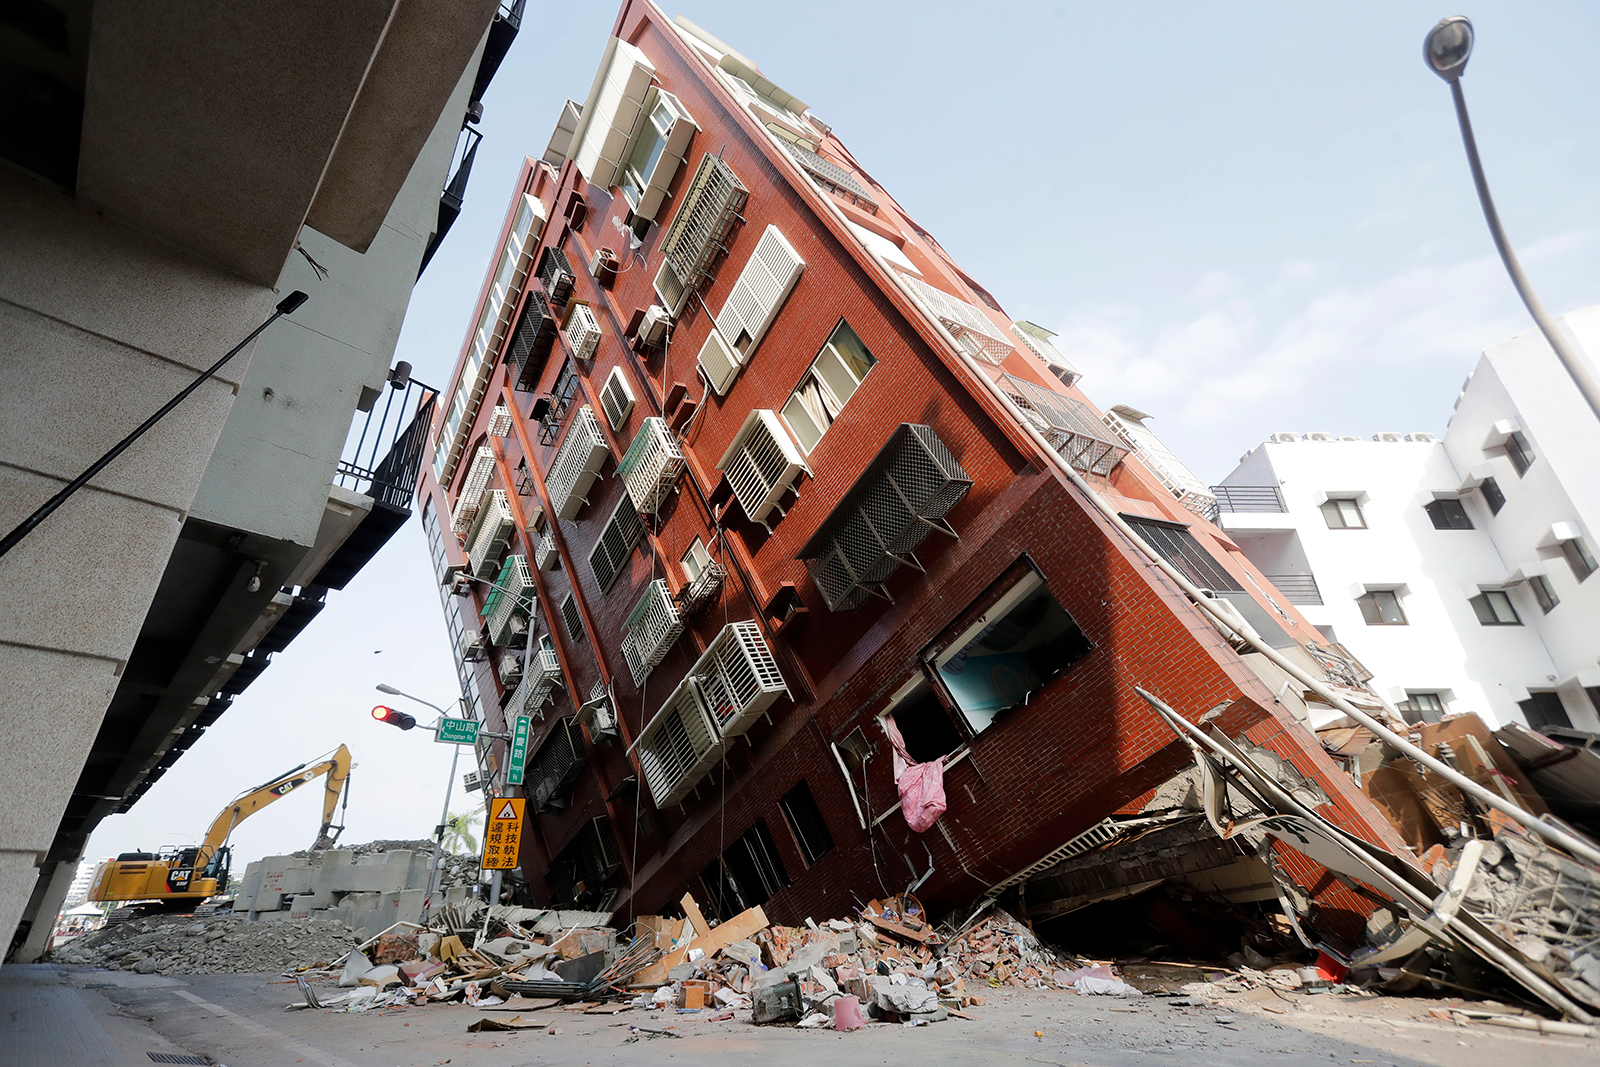 Debris surrounds a titled building a day after a powerful earthquake struck, in Hualien City, Taiwan, on Thursday.